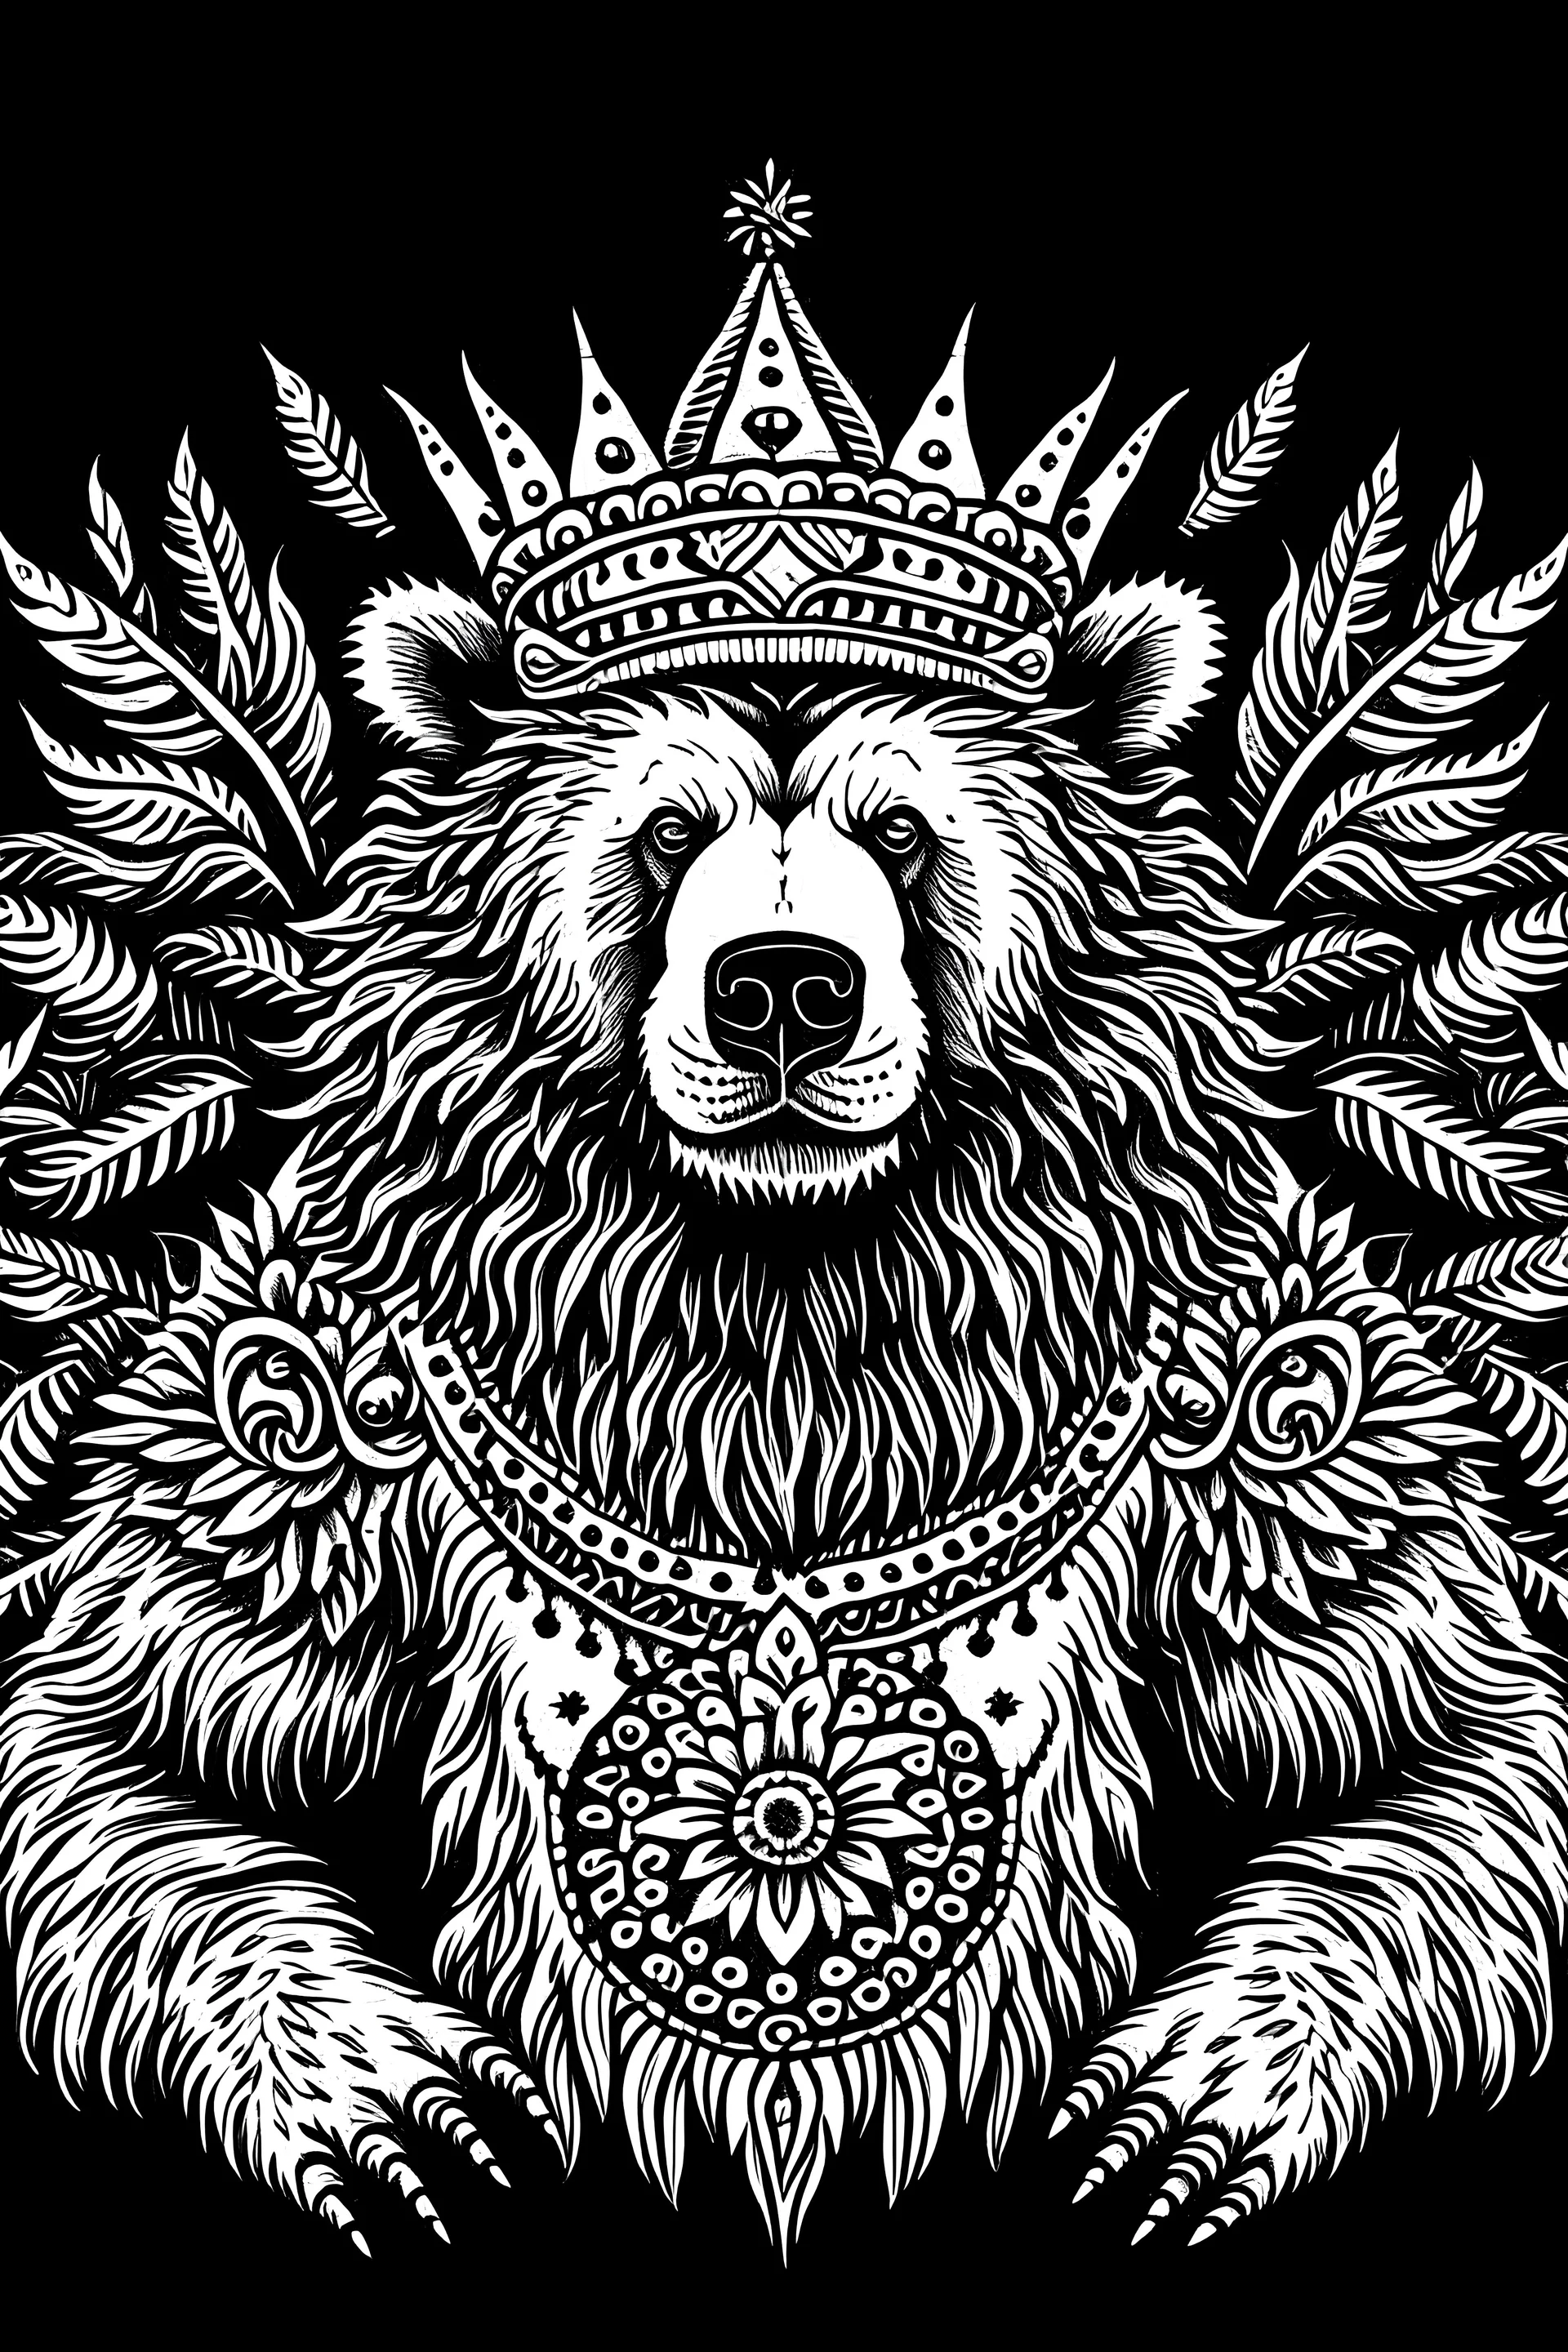 Wiccan Grizzly with palms up wearing a crown black and white